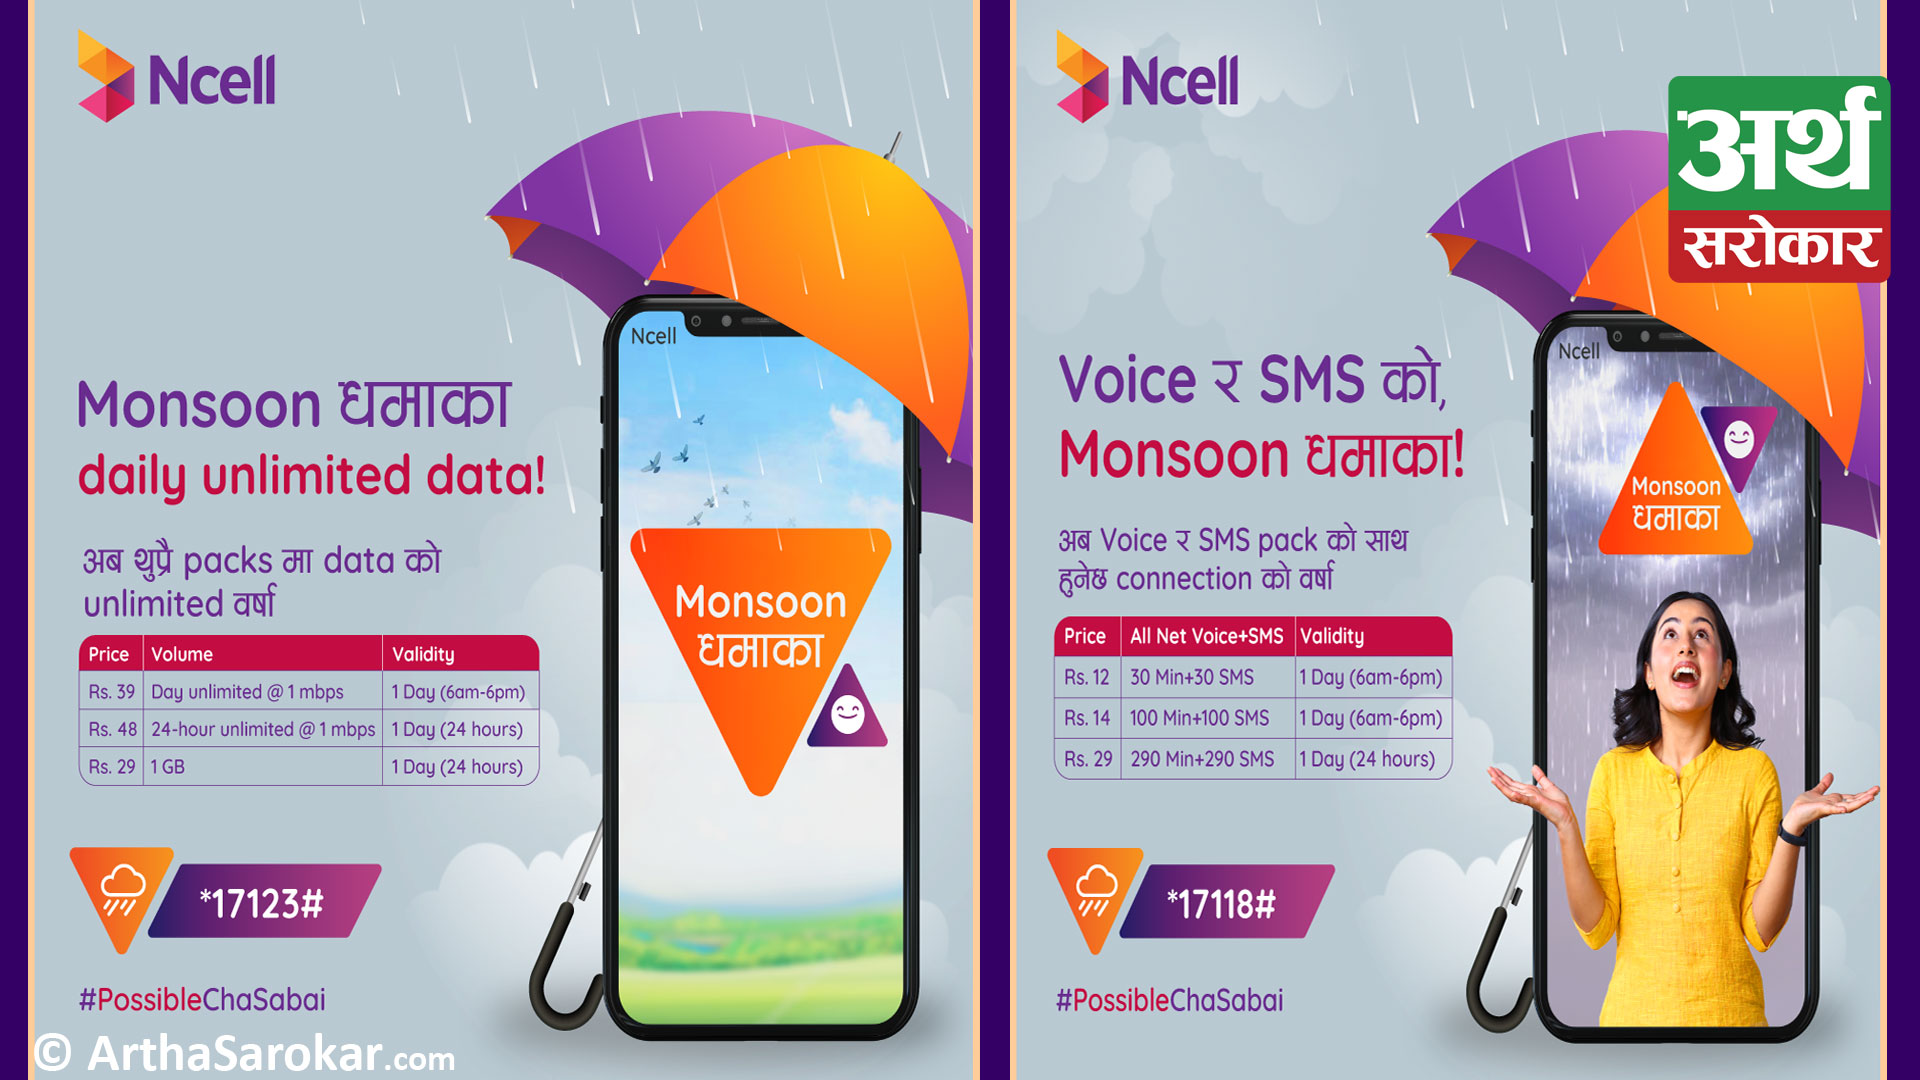 Ncell brings unlimited data and attractive all-net voice + SMS bundle packs